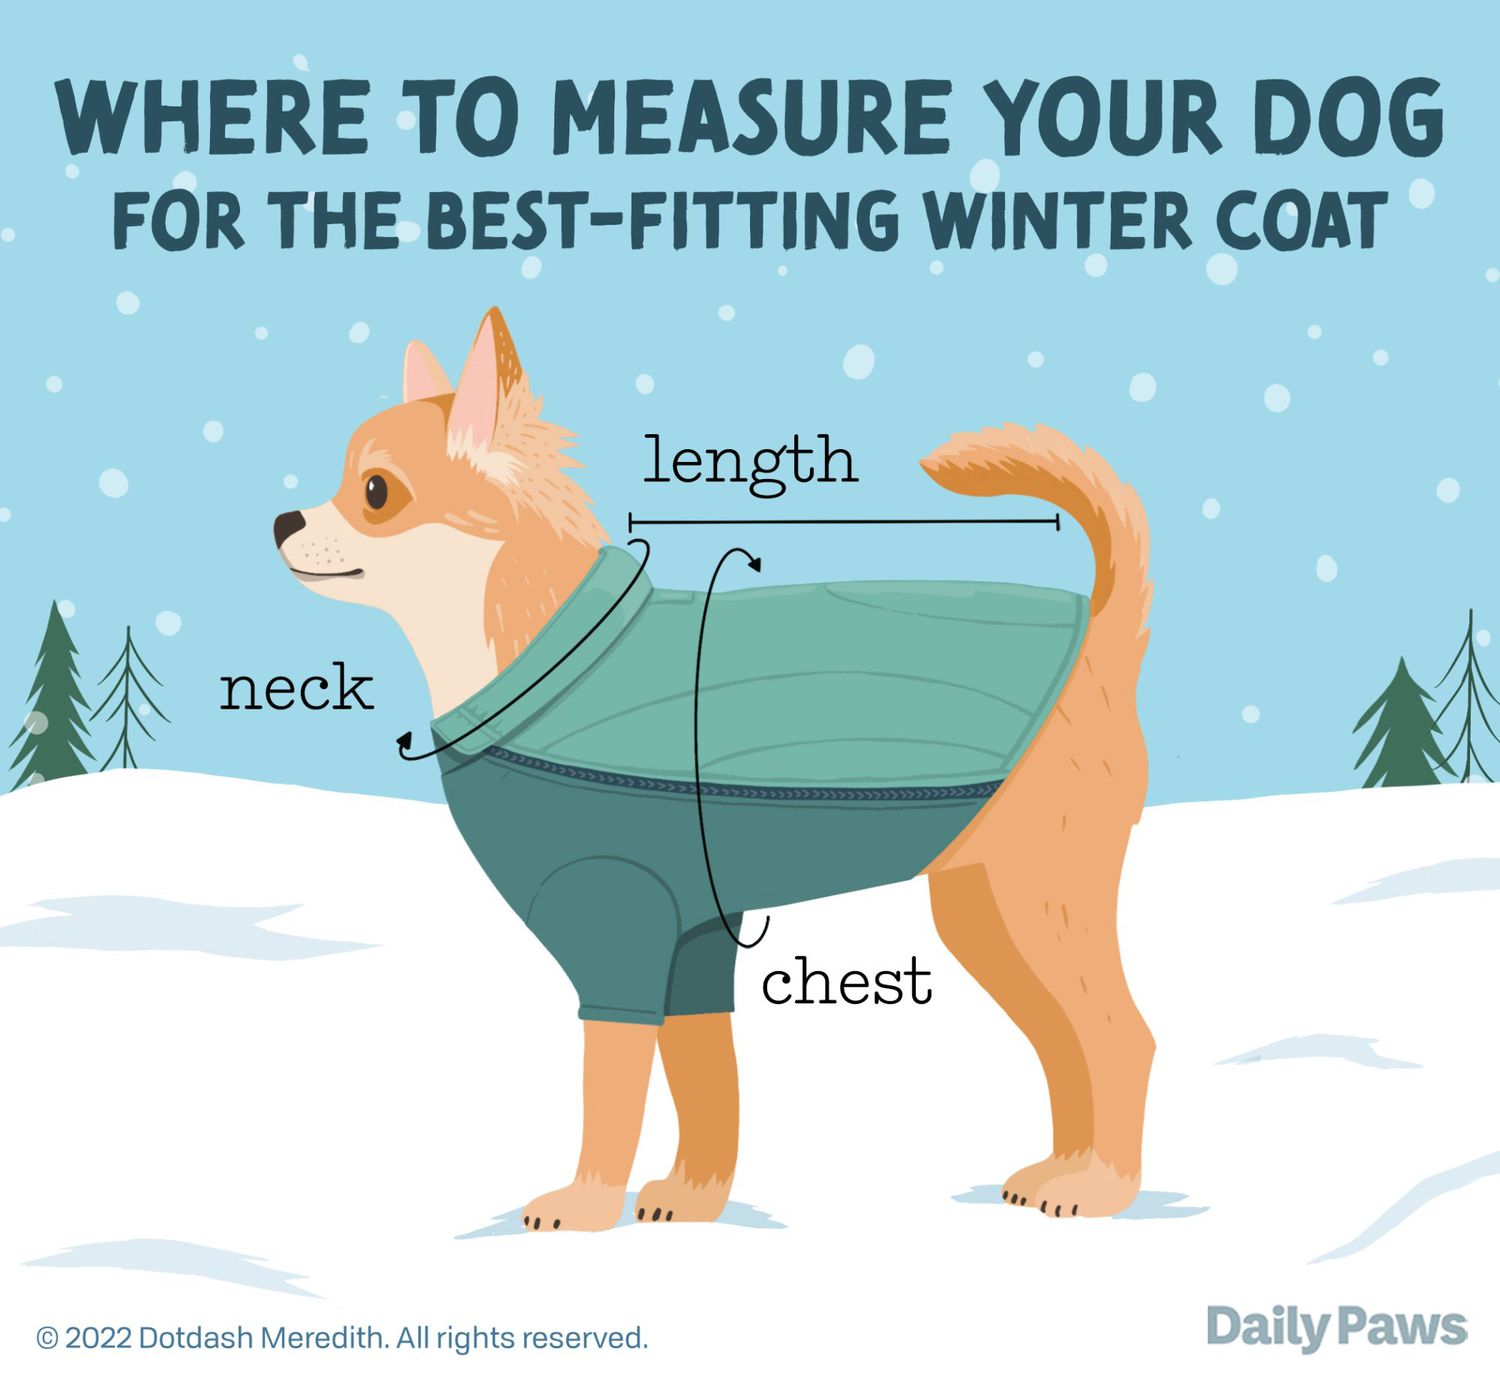 infographic showing wear to measure you dog to determine his coat size